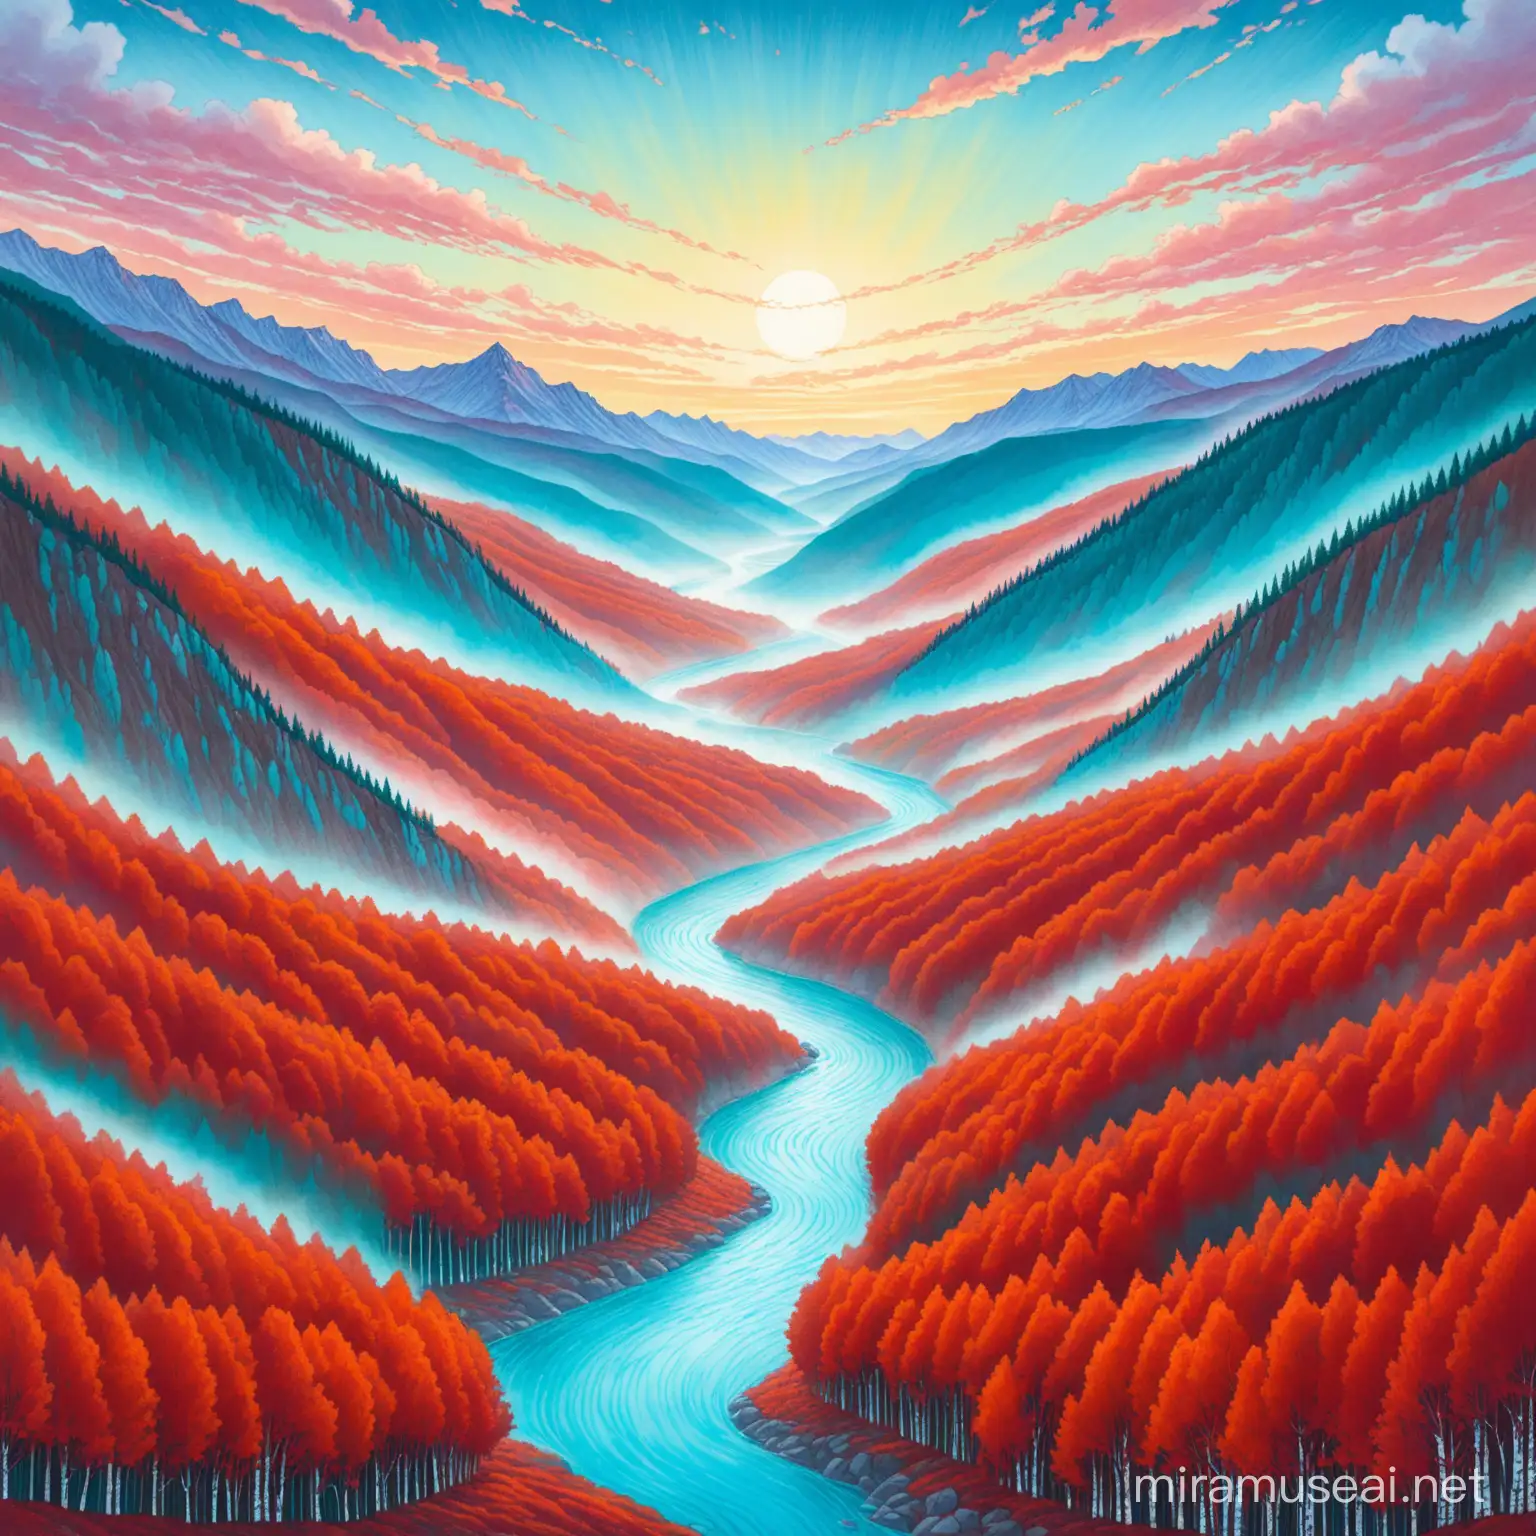 The Cirmson Valley, wilth silver birch bark trees adorned with red leaves, giant Iron mountains surrounding the valley, and a mystic aqua blue rhine running through the center of the valley, in pastel colors hand drawn